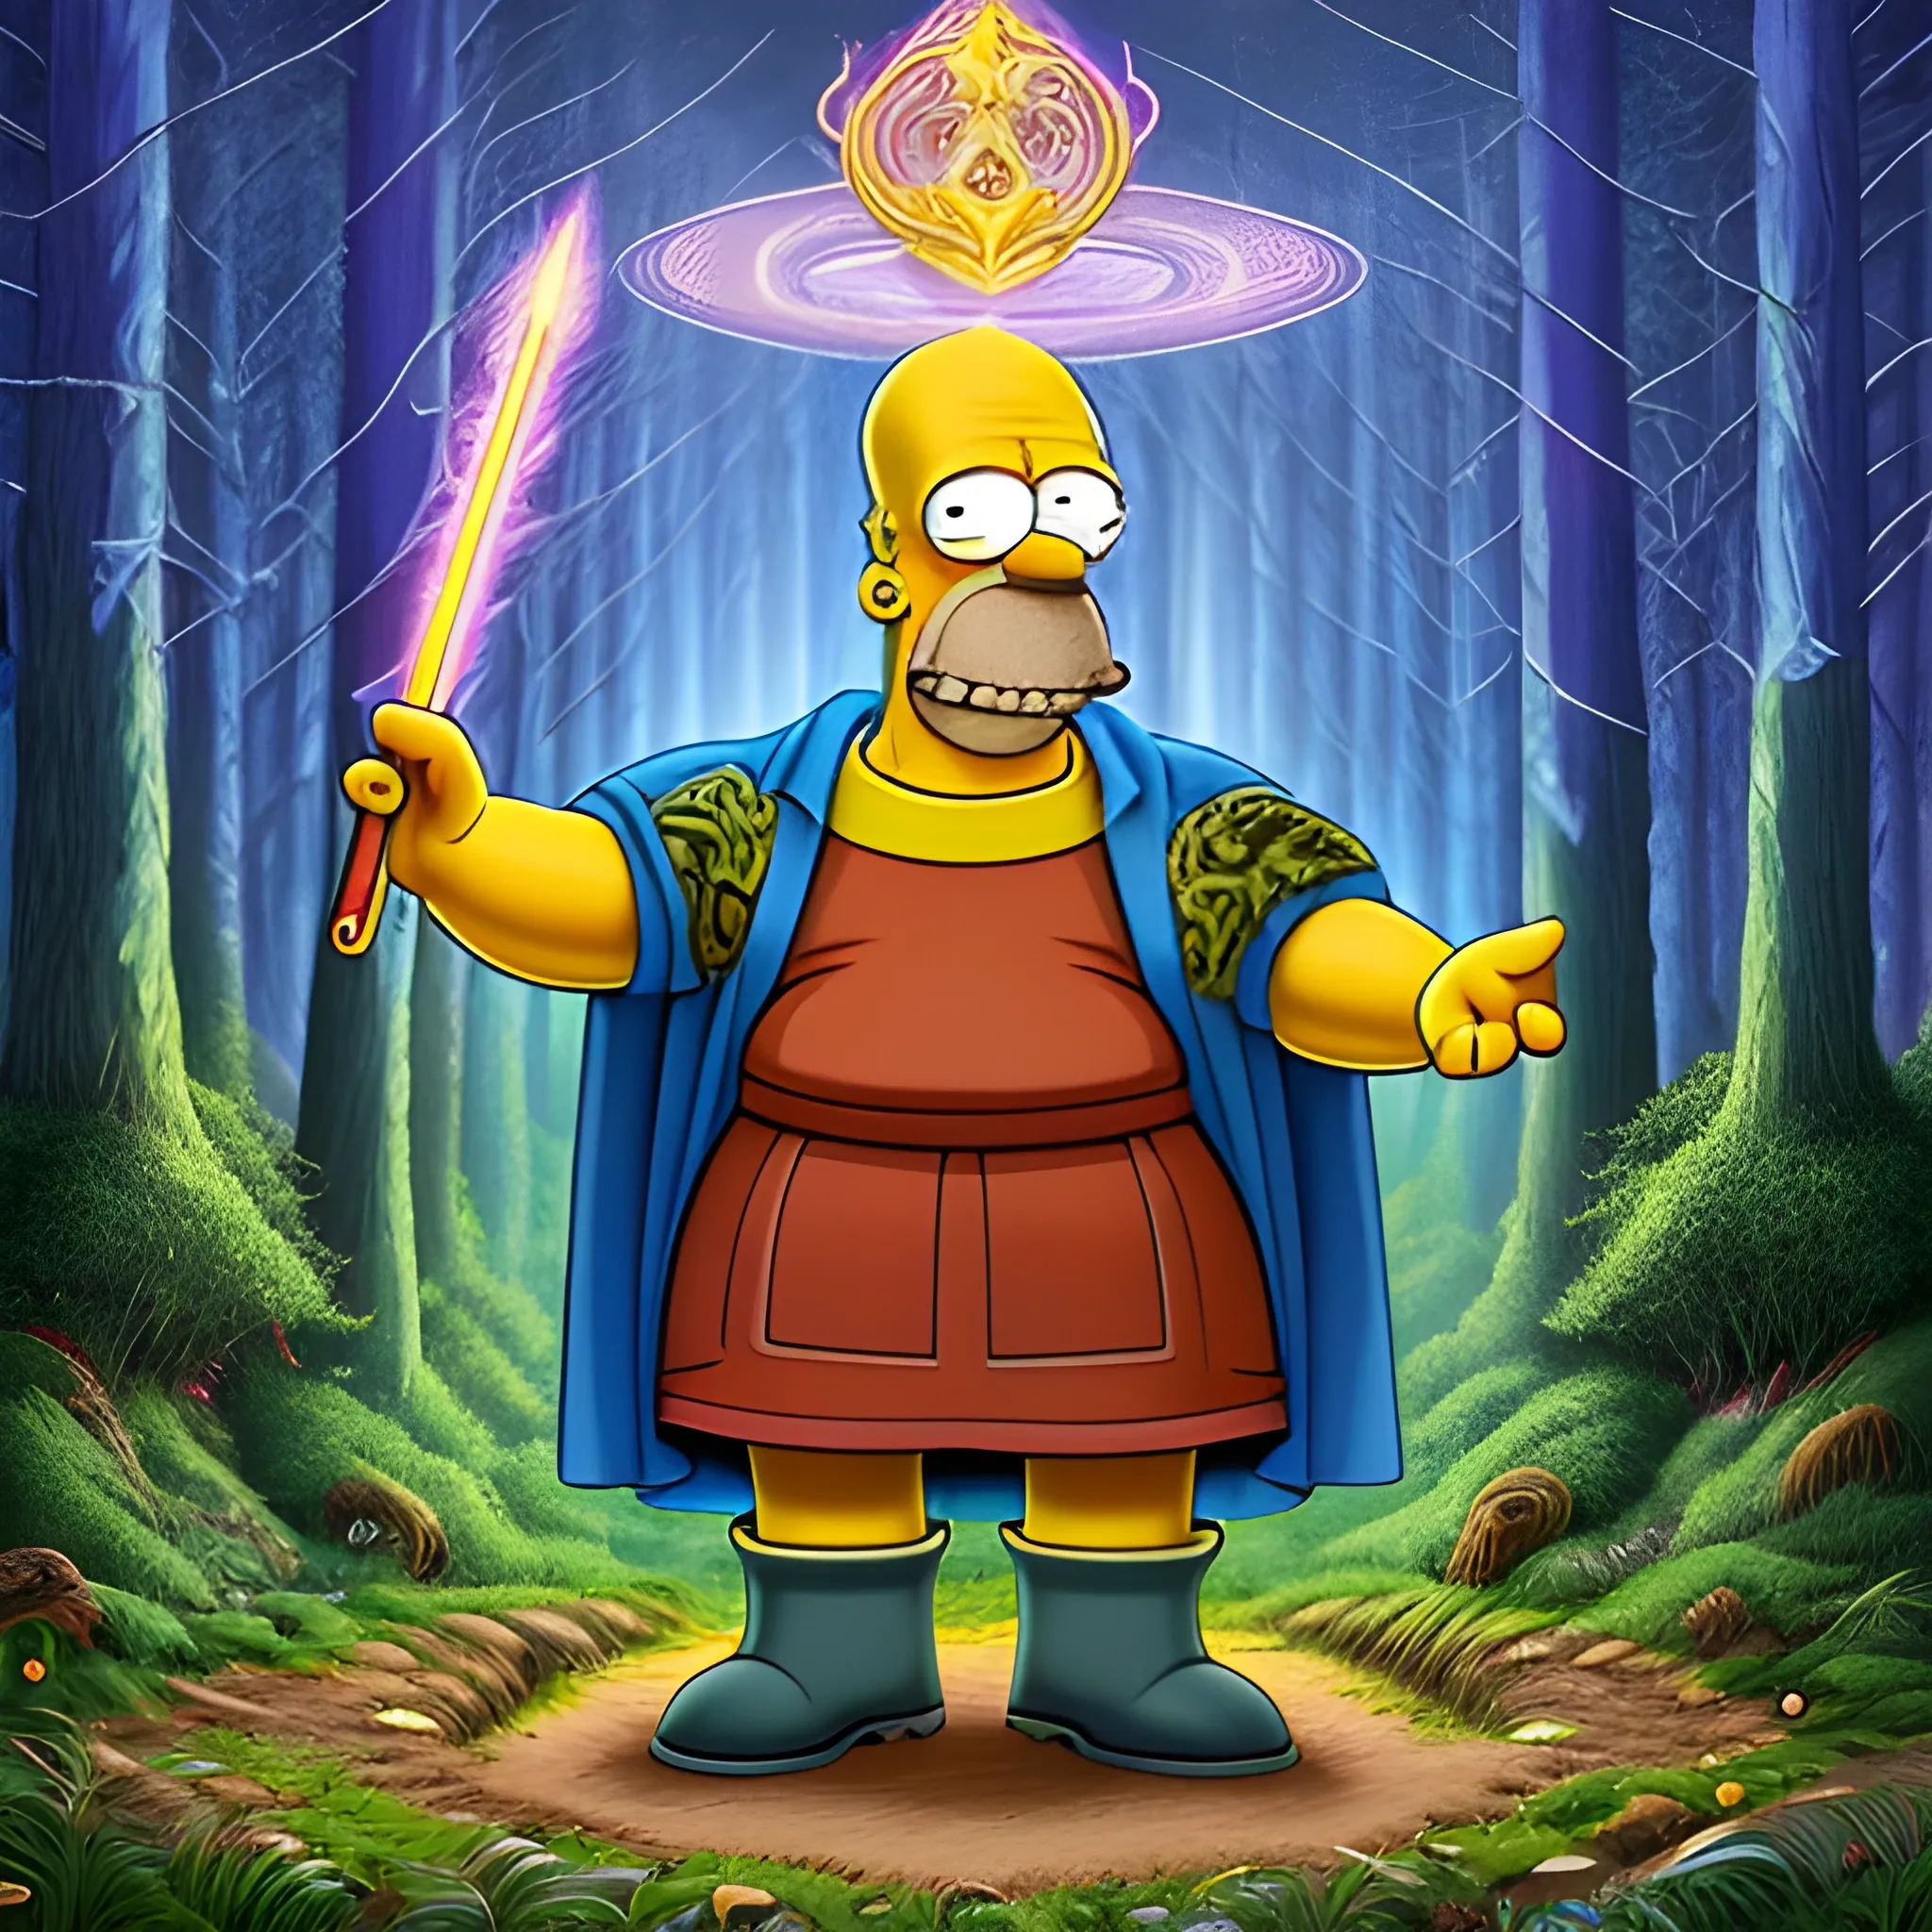 Homer Simpson, standing in the middle of the forrest path, dressed in a hyper detailed sorcerer's outfit; holds a hyper detailed magic wand from which a ray of light emanates, hyper detailed background; The Simpsons cartoon style